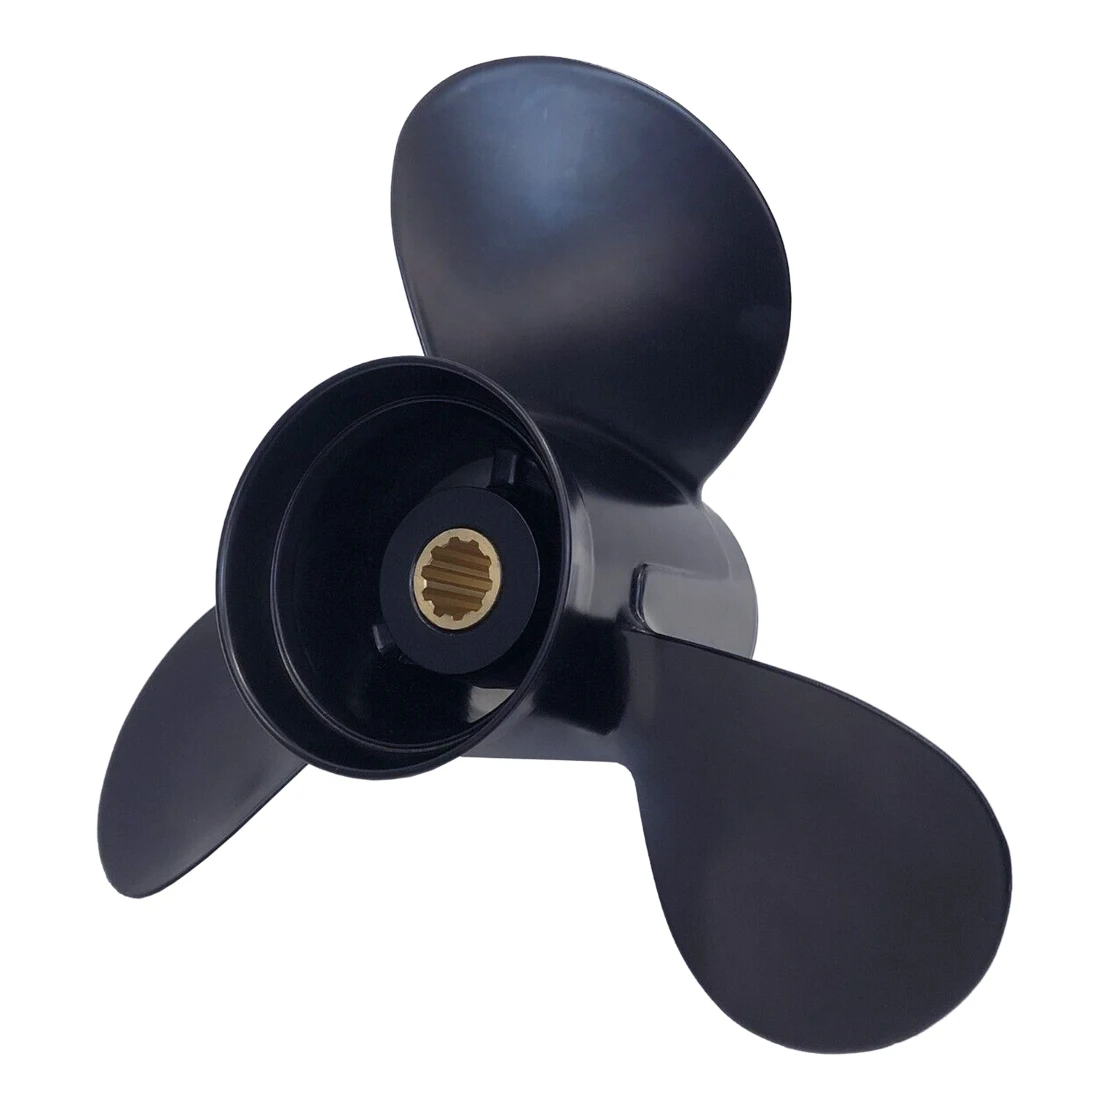 346-64104-5 3R0B645270 Boat Propeller 48-19640A40 Fit for Mercury Mariner Tohatsu Nissan Outboard 25-30HP Black Aluminum Alloy